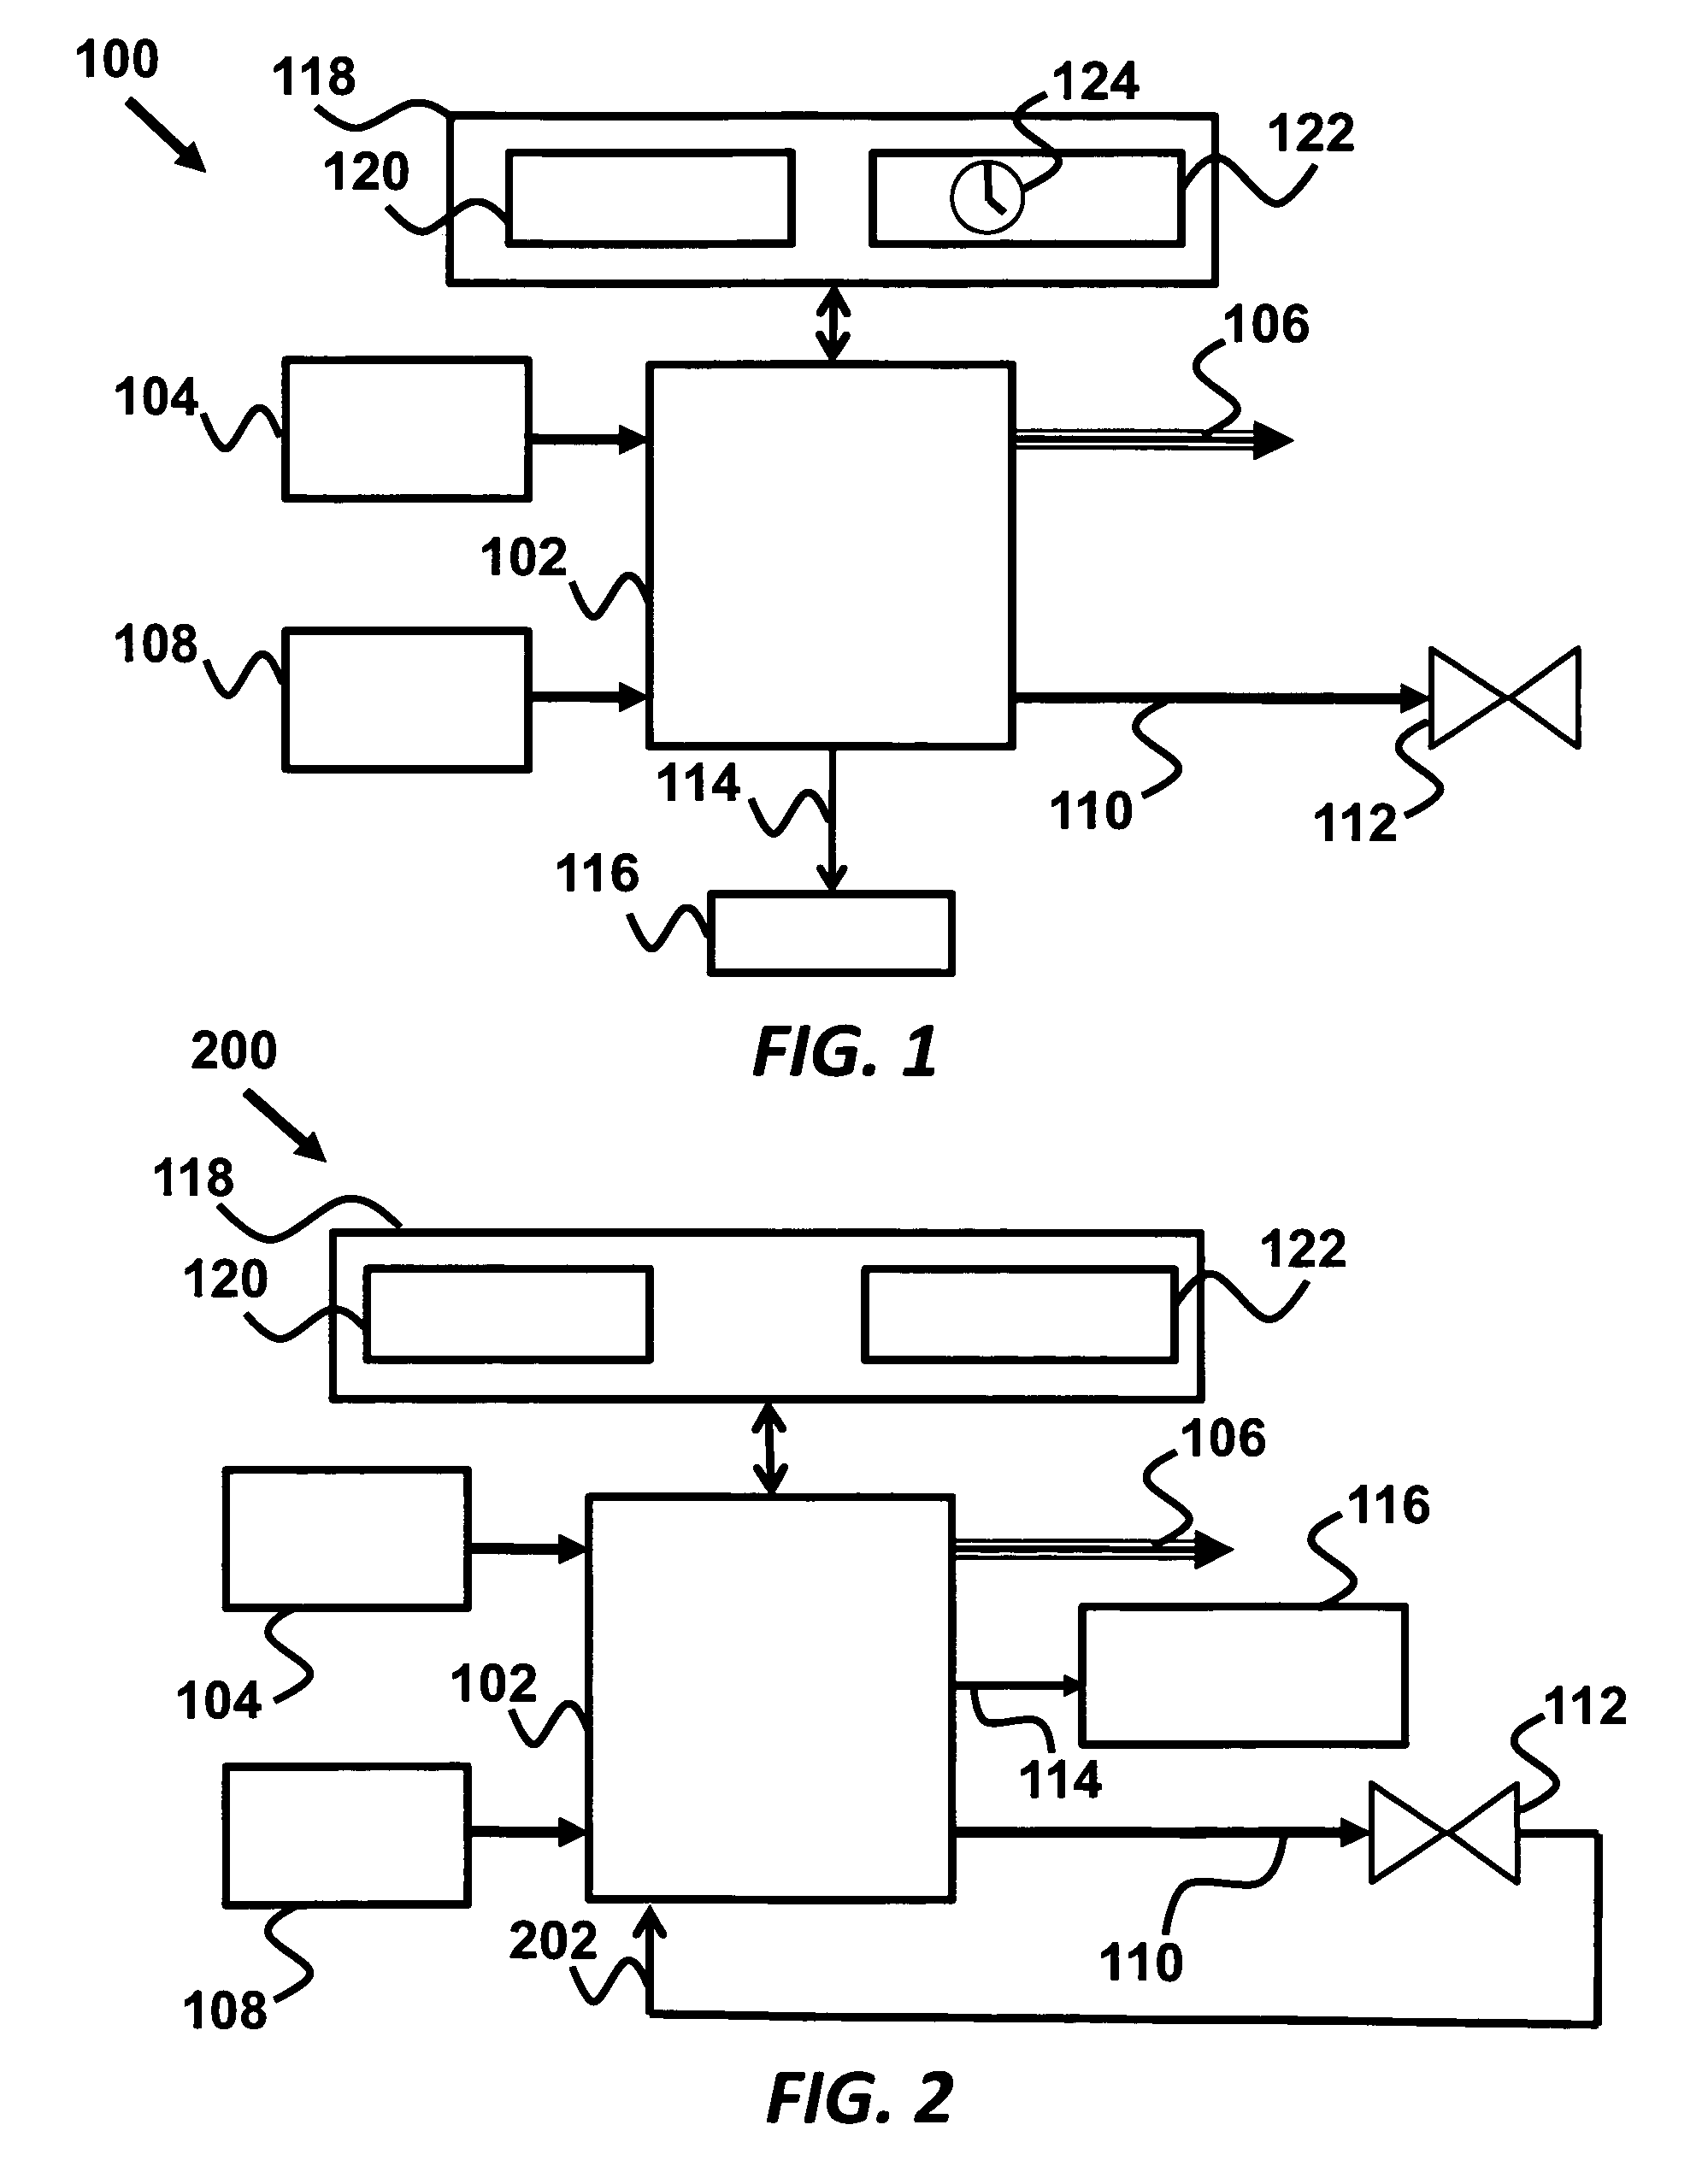 Controller for fuel cell operation